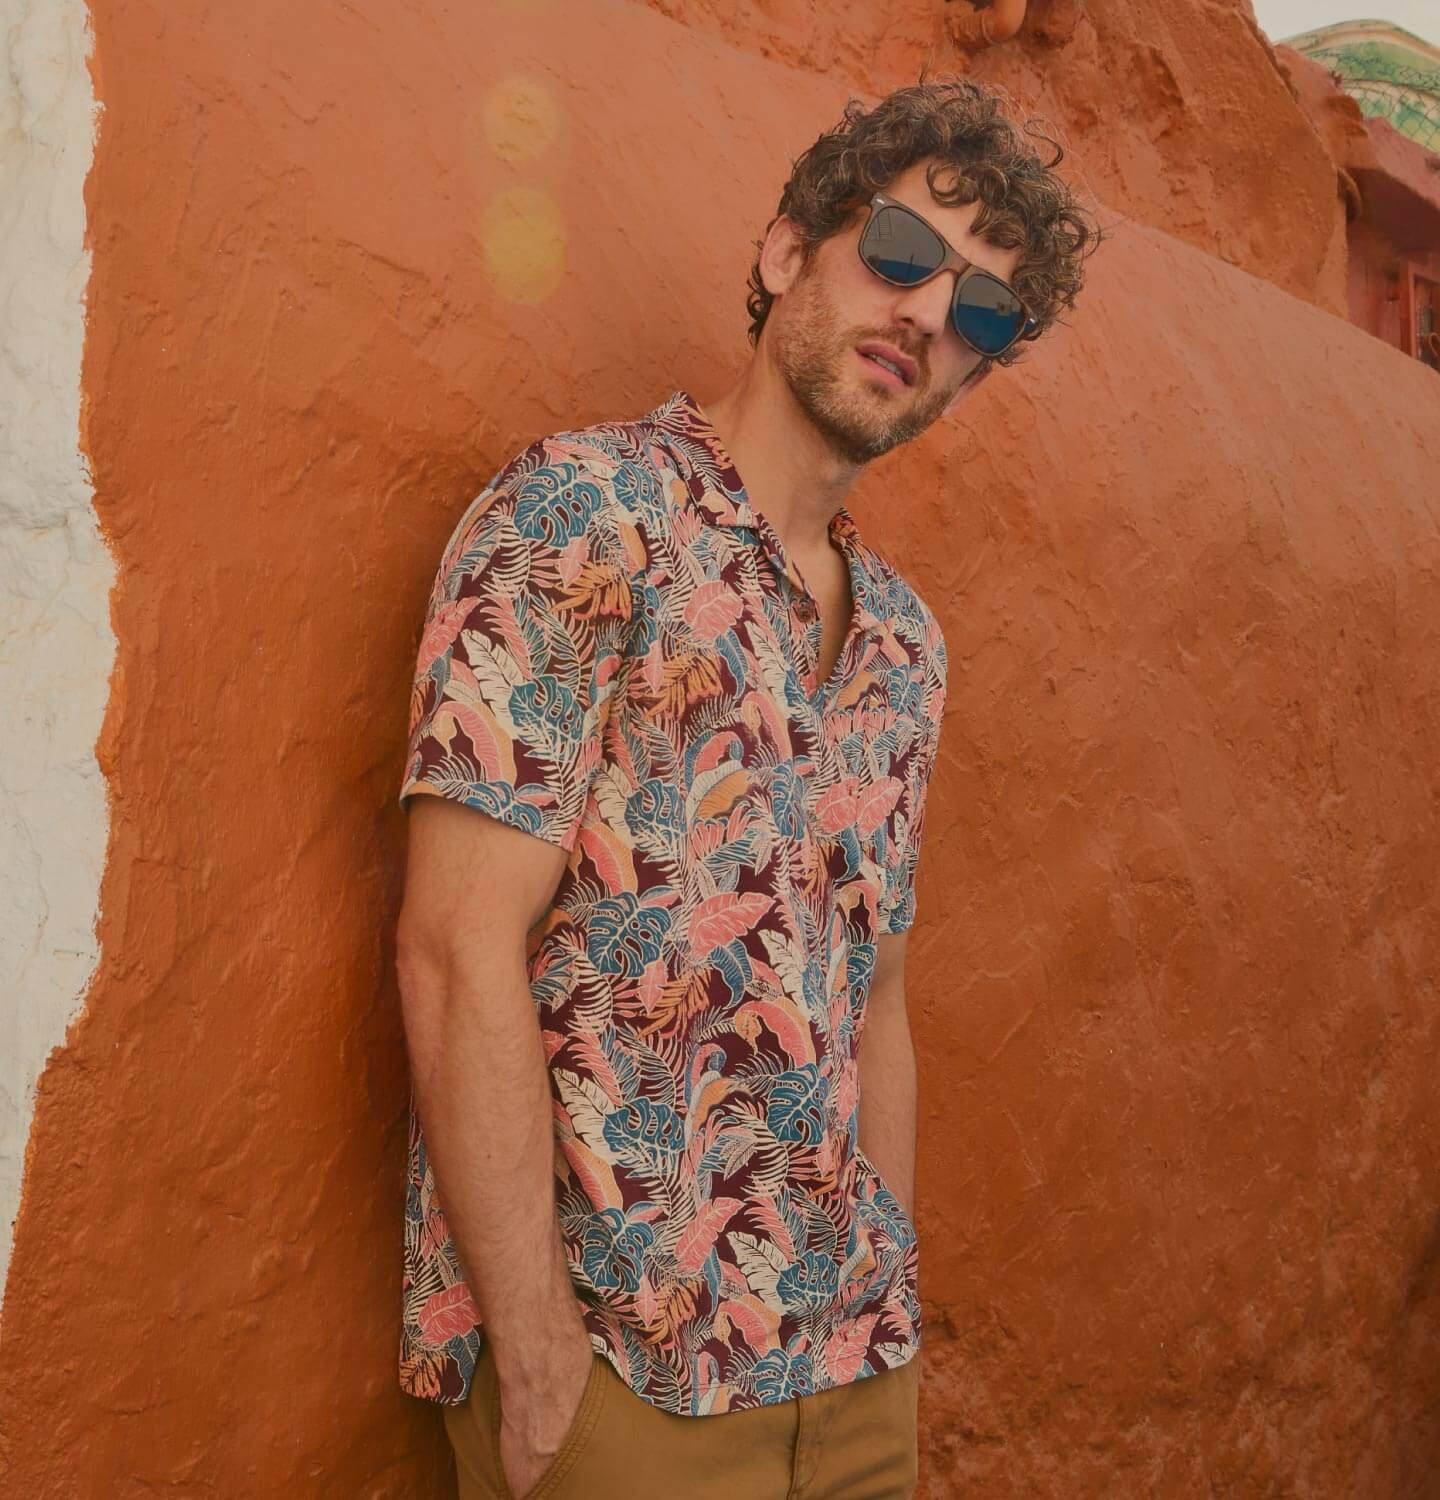 Man in sunglasses, wearing a patterned shirt and leaning against a wall